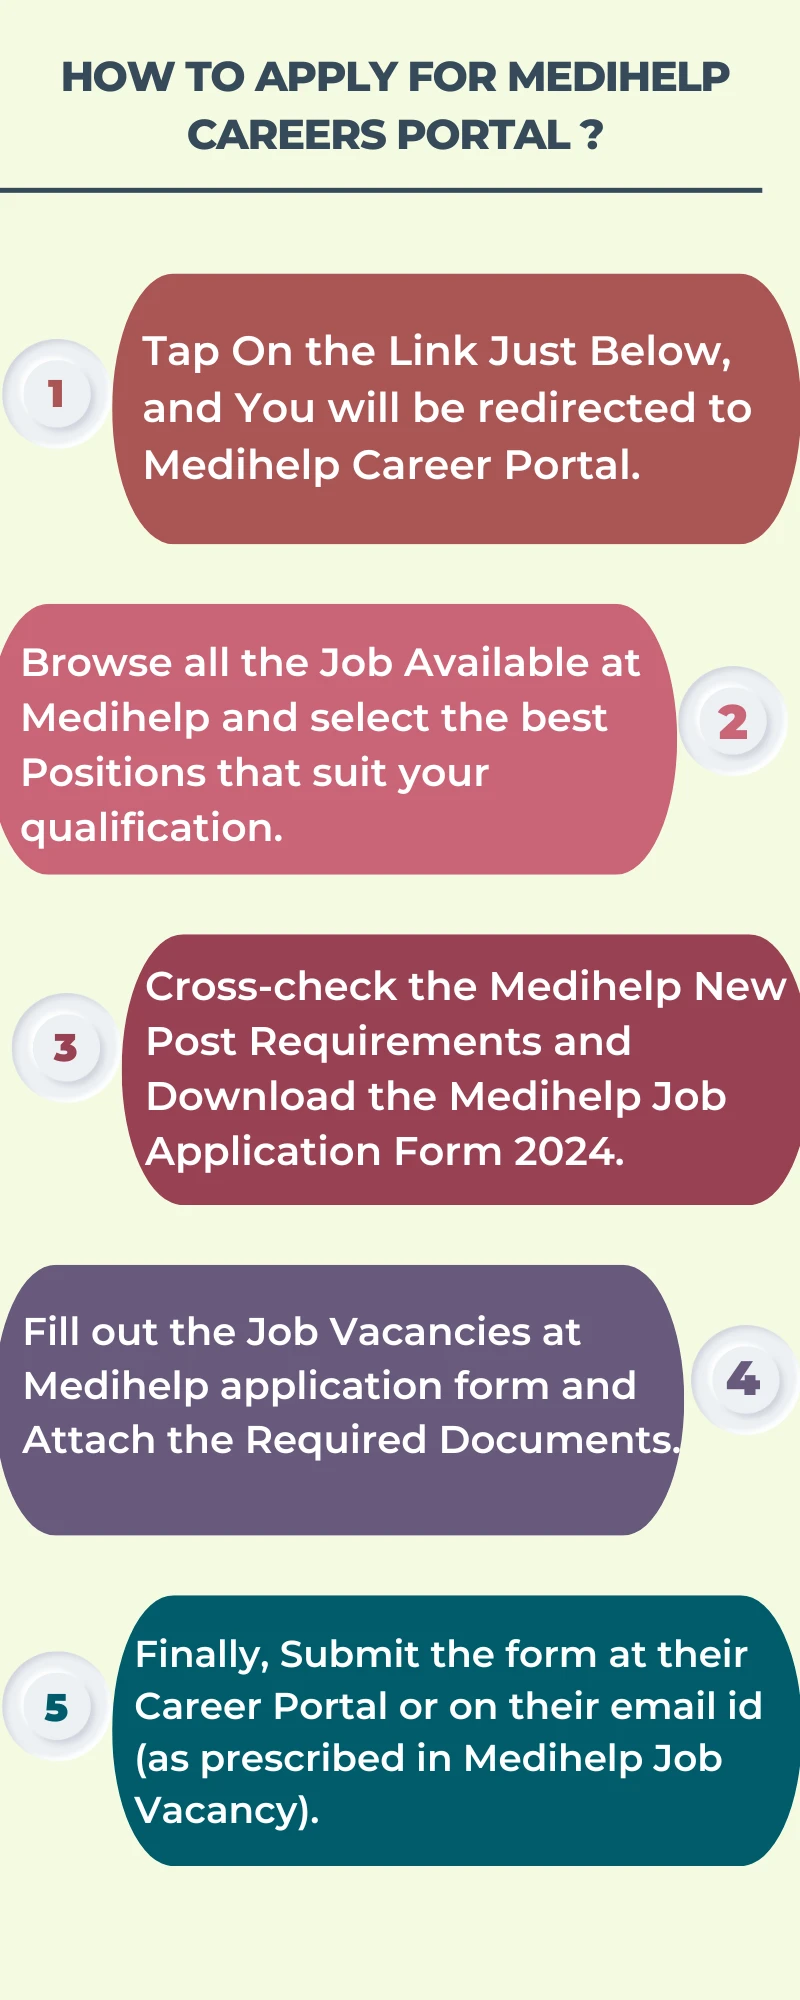 How To Apply for Medihelp Careers Portal ?